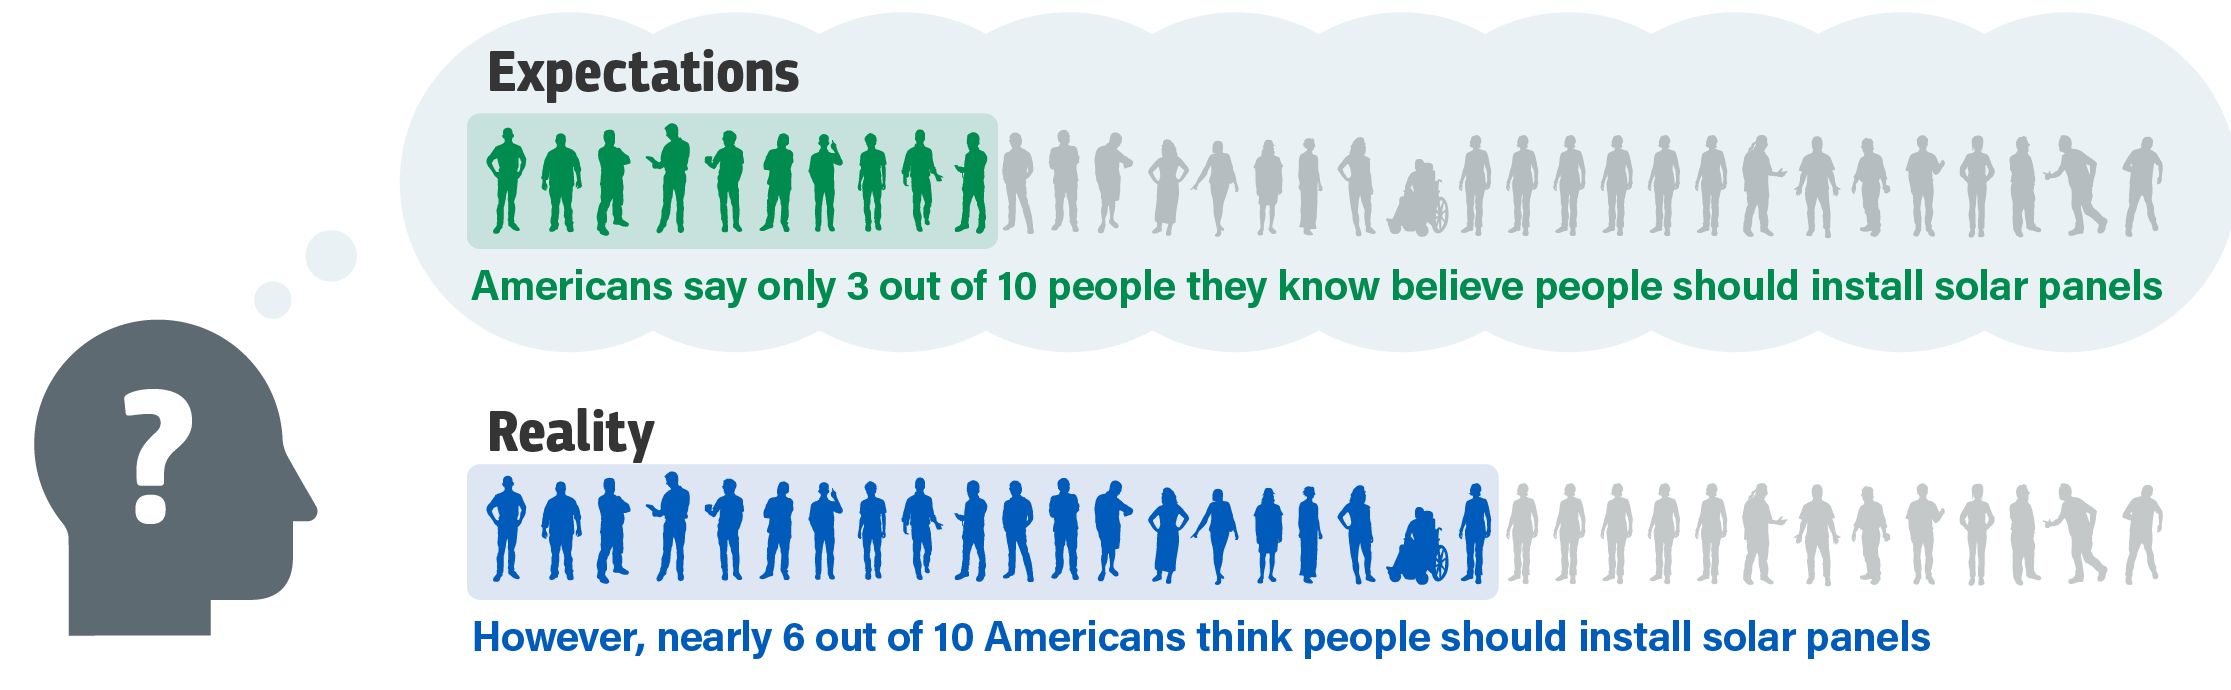 An illustration of psycho social beliefs: most people underestimate the beliefs of the people around them.